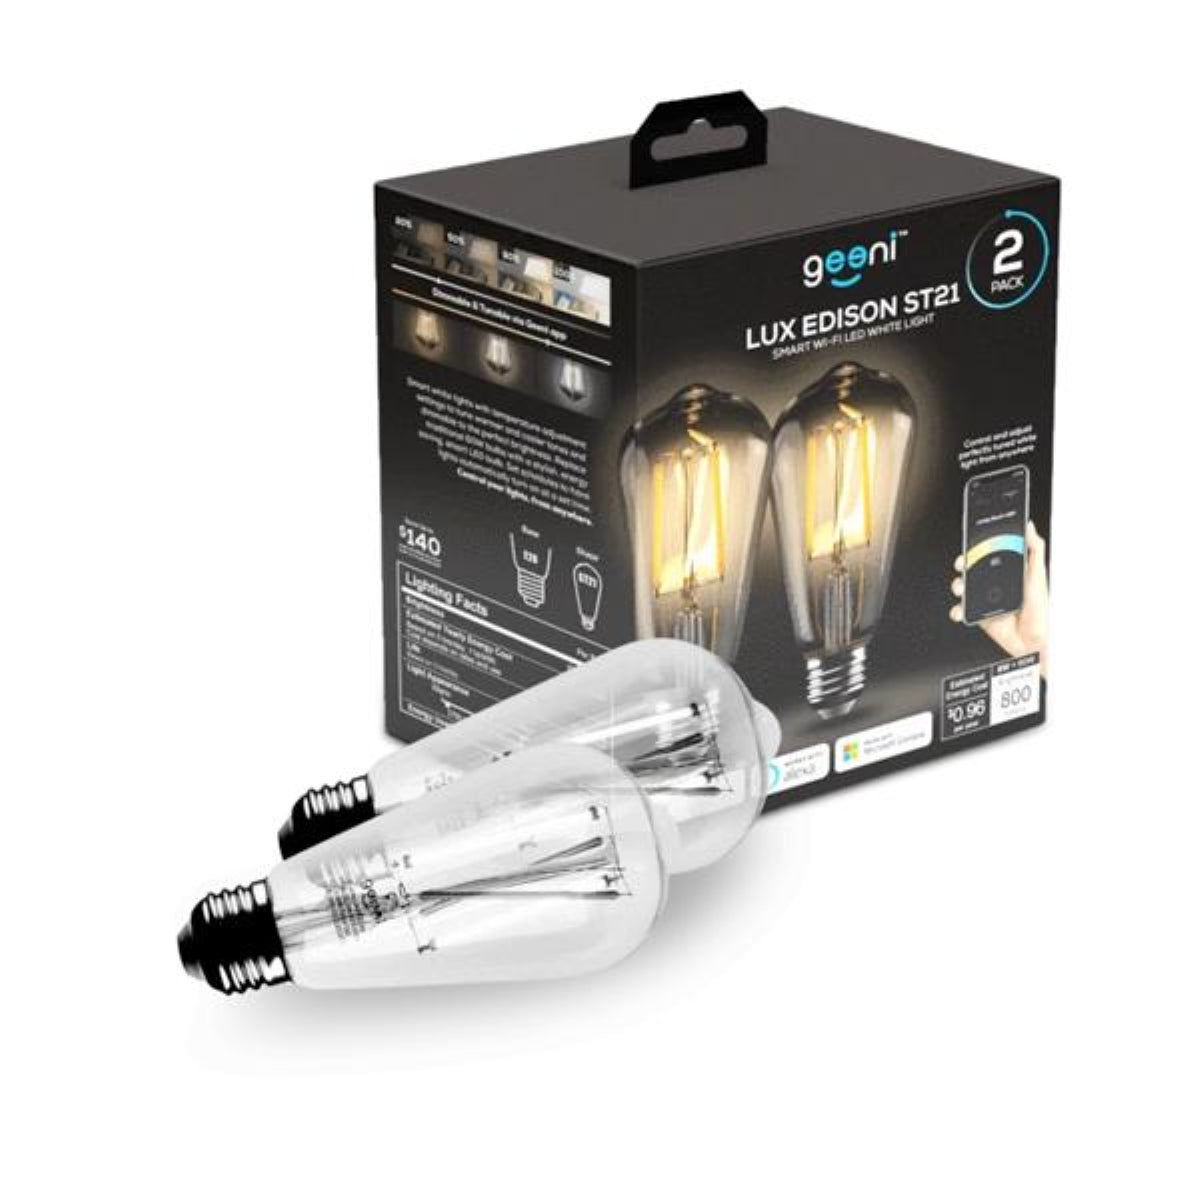 Geeni Lux Edison ST21 Smart Bulb - Tunable White (2-Pack)